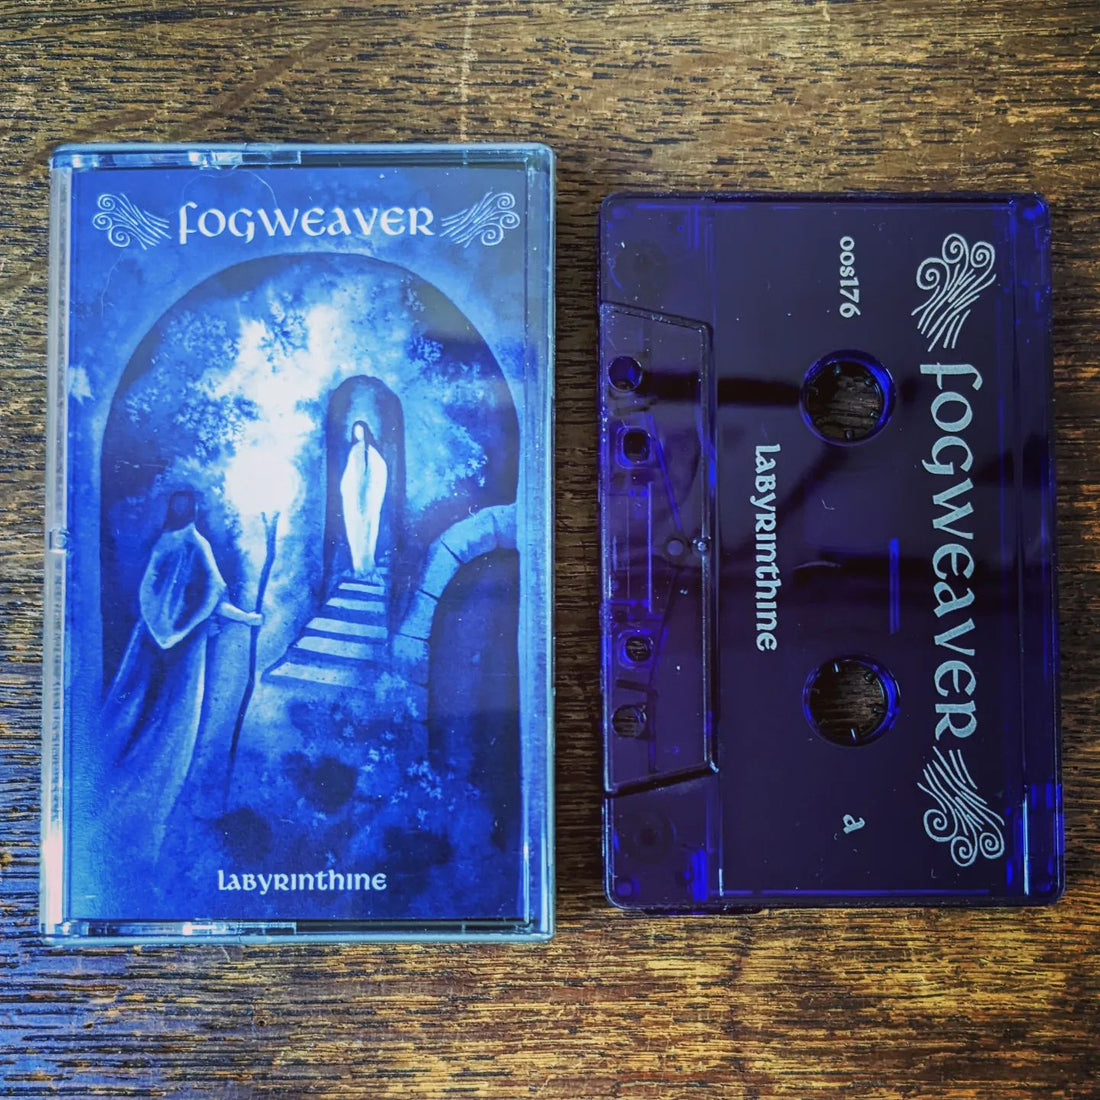 FOGWEAVER "Labyrinthine" Tape/CD (lim.250) Out Now